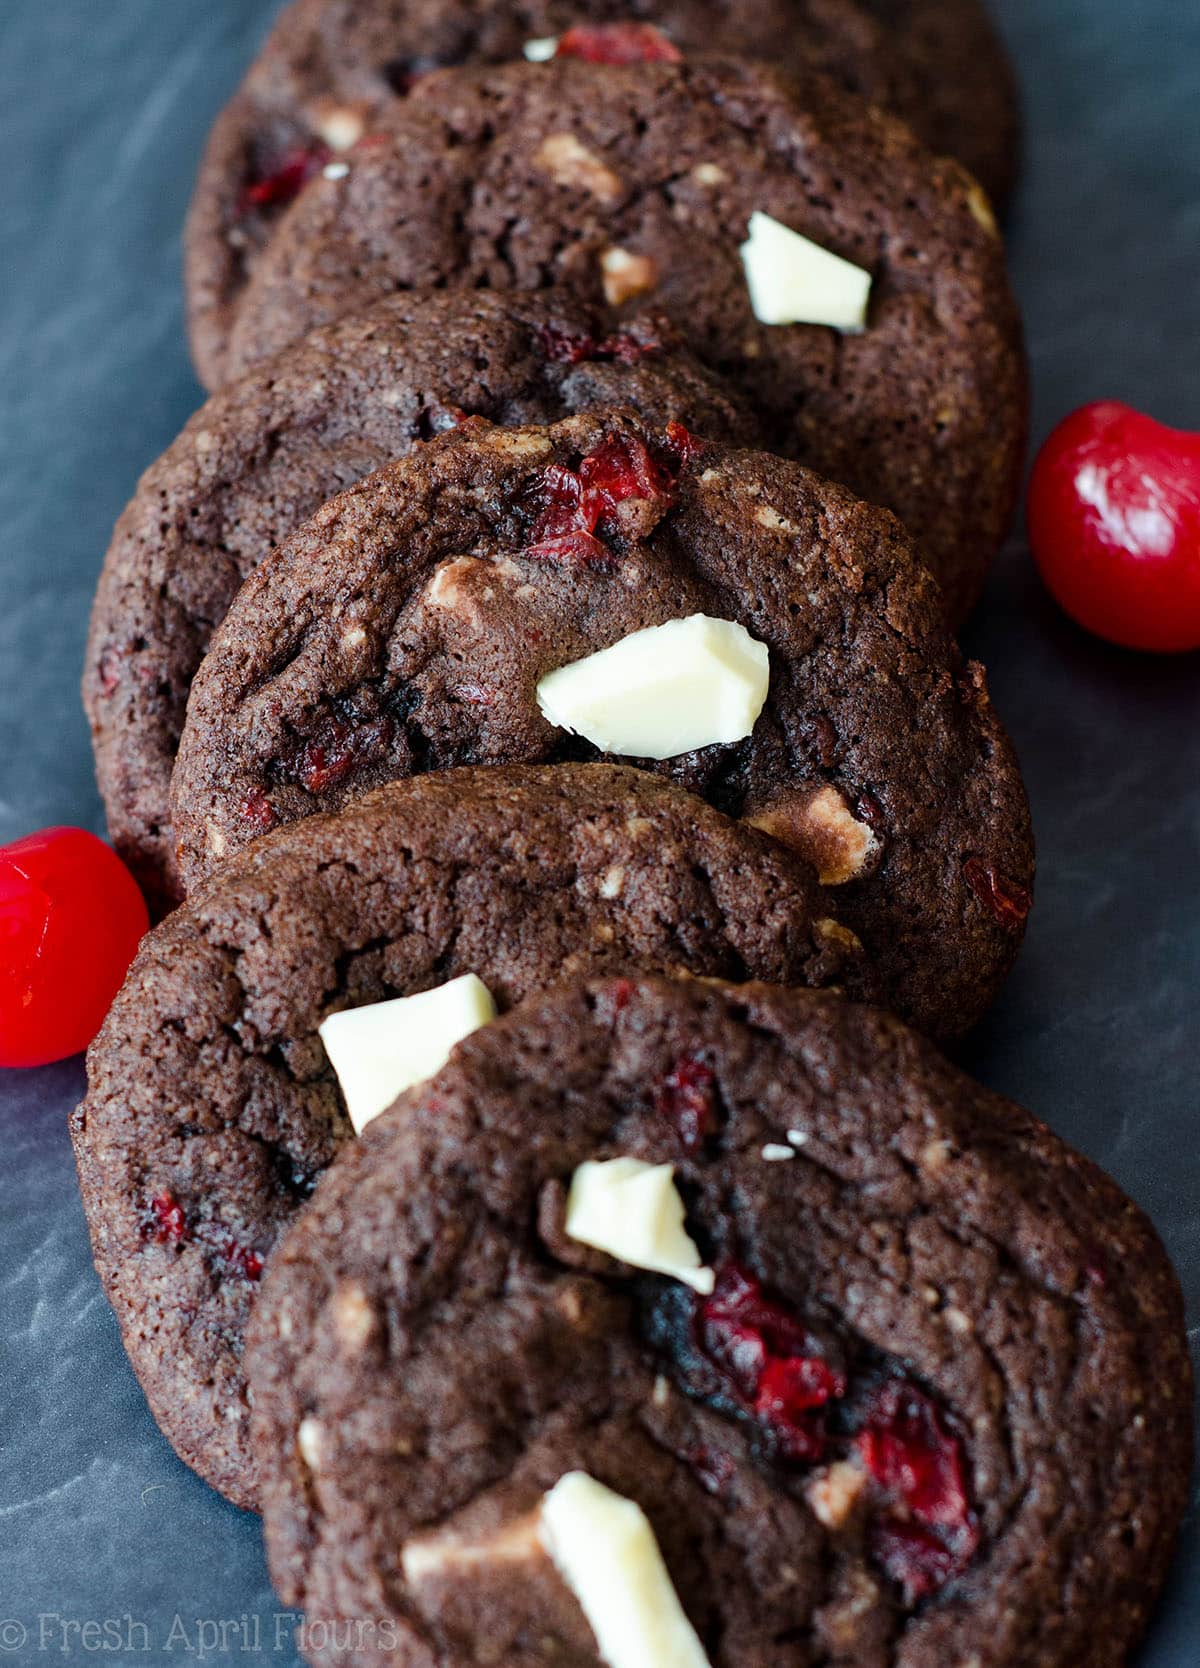 Black Forest Cookies: Soft and chewy chocolate cookies filled with creamy white chocolate chunks and sweet maraschino cherry pieces.